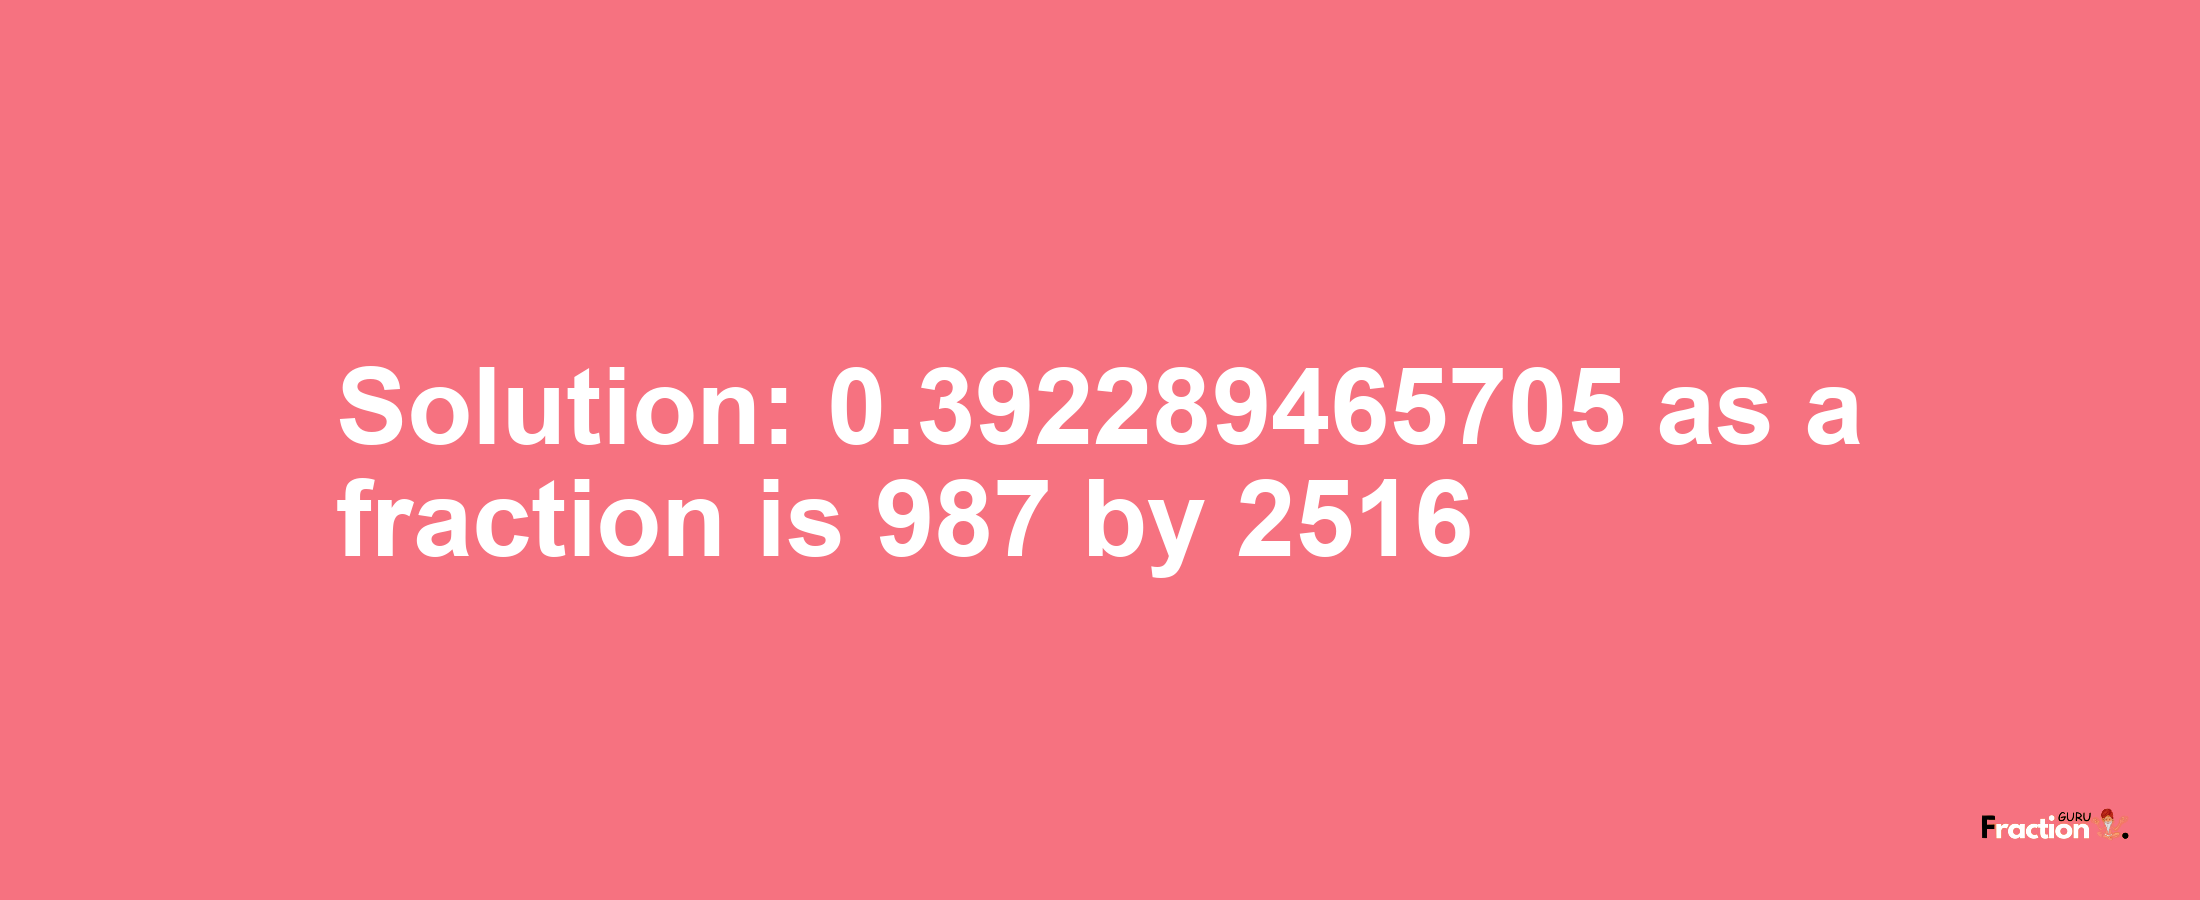 Solution:0.392289465705 as a fraction is 987/2516